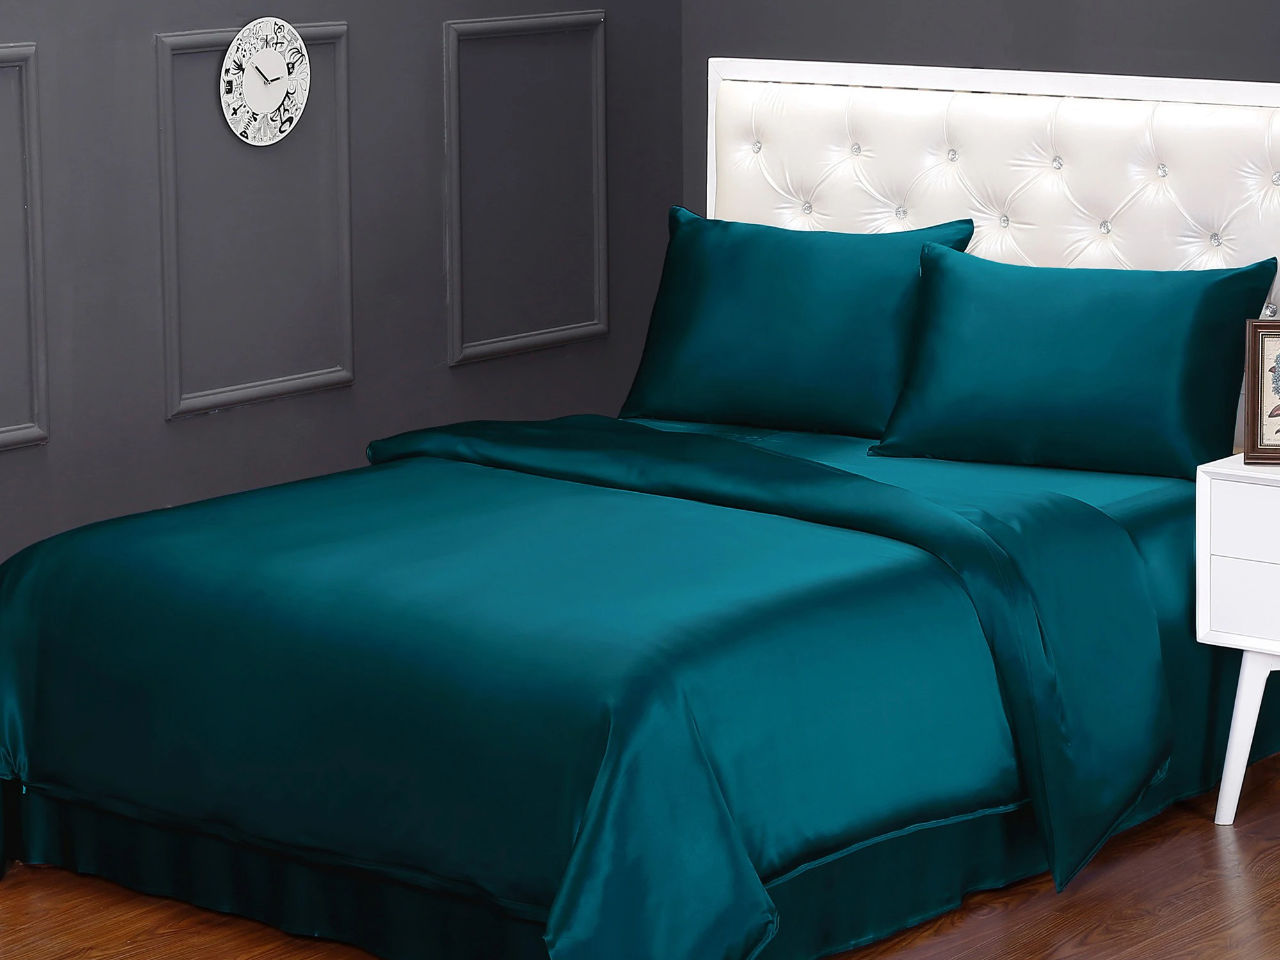 Bed with teal silk sheets